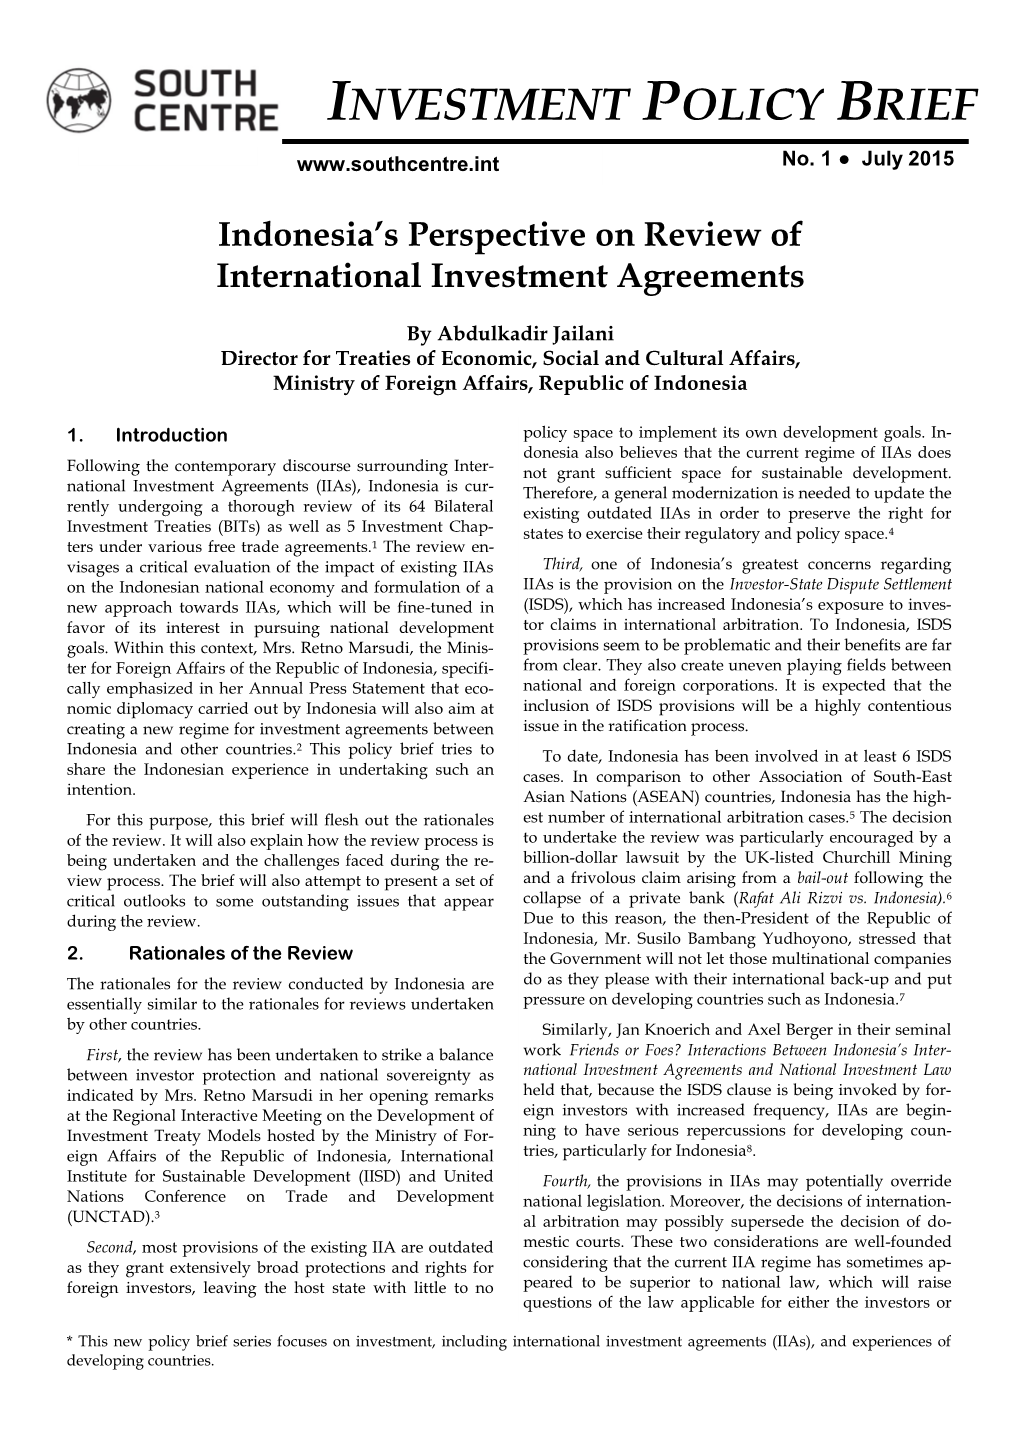 Indonesia’S Perspective on Review of International Investment Agreements